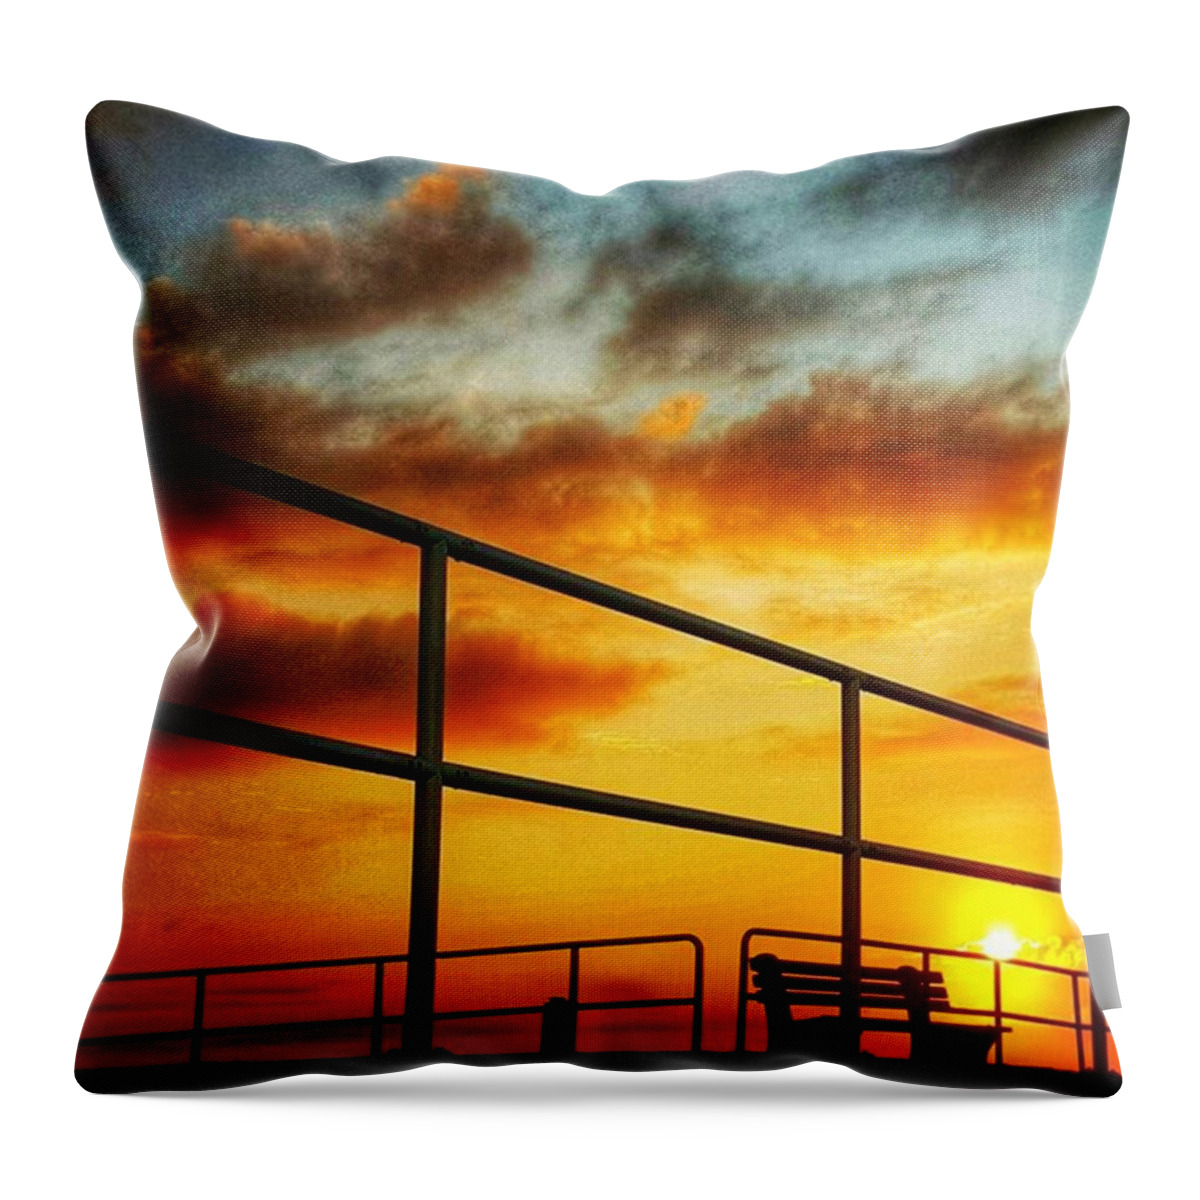  Throw Pillow featuring the photograph Good Morning Sunshine by Lauren Fitzpatrick